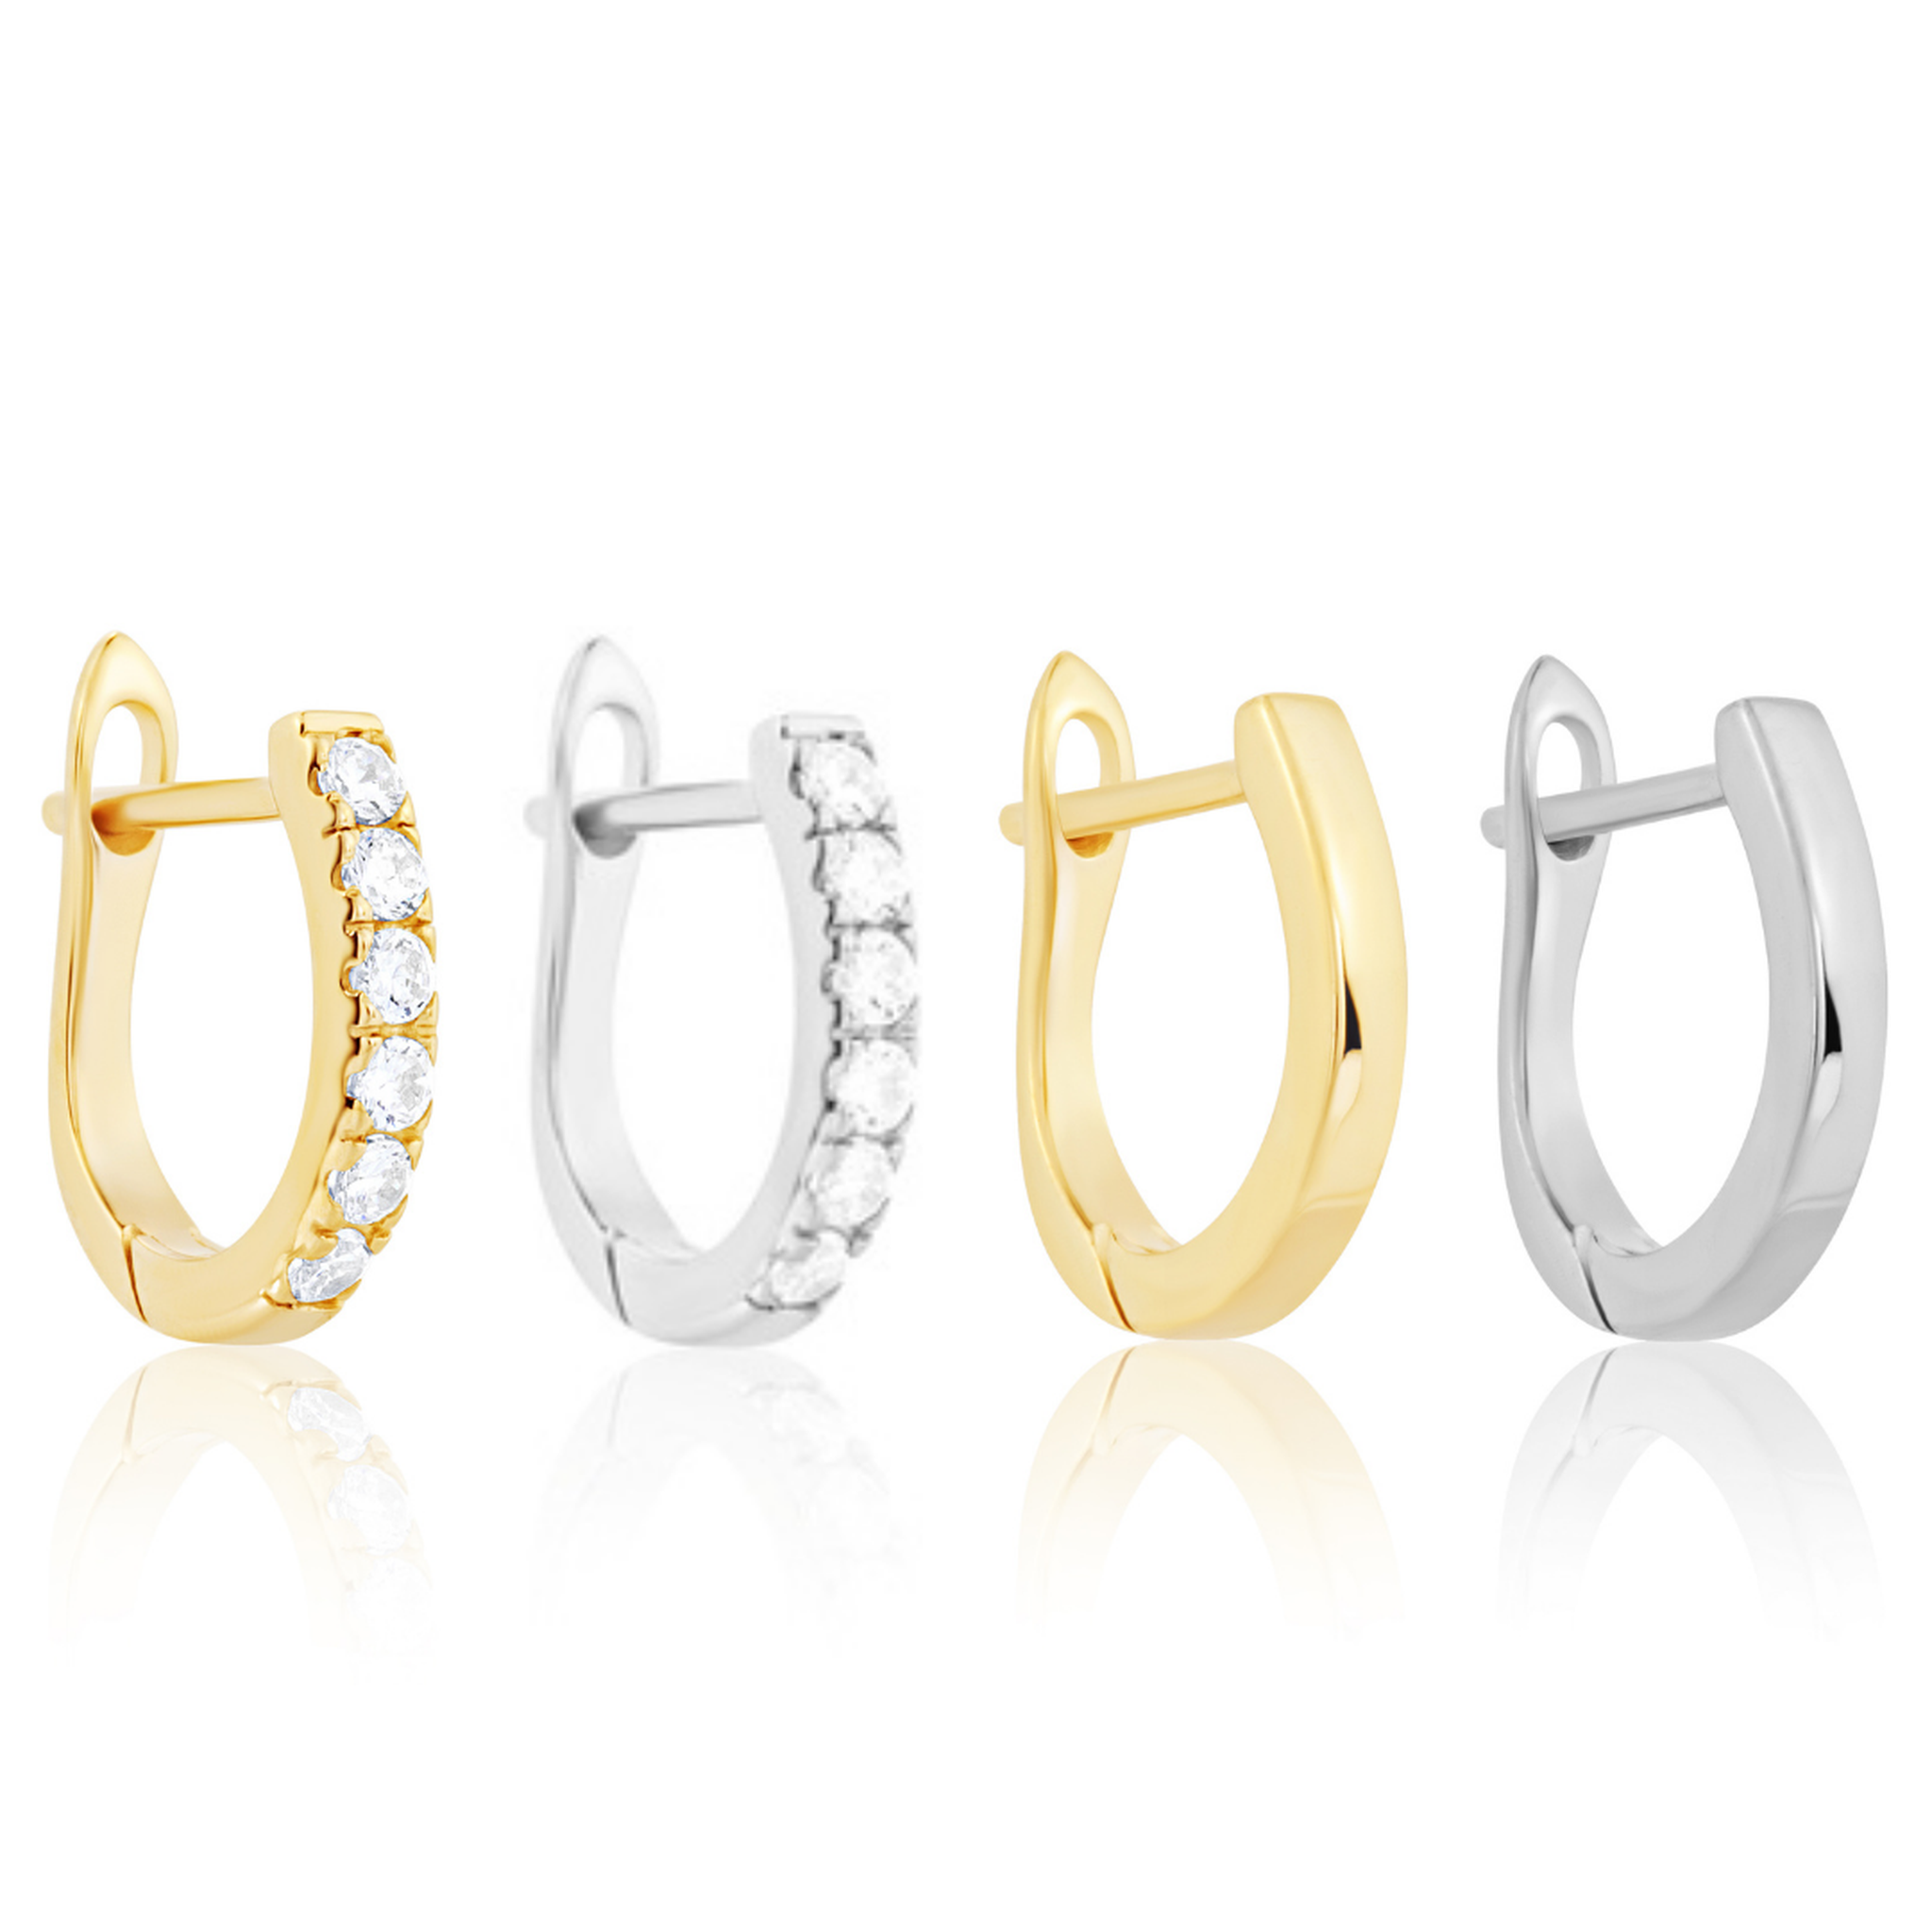 The Leverback Hoops